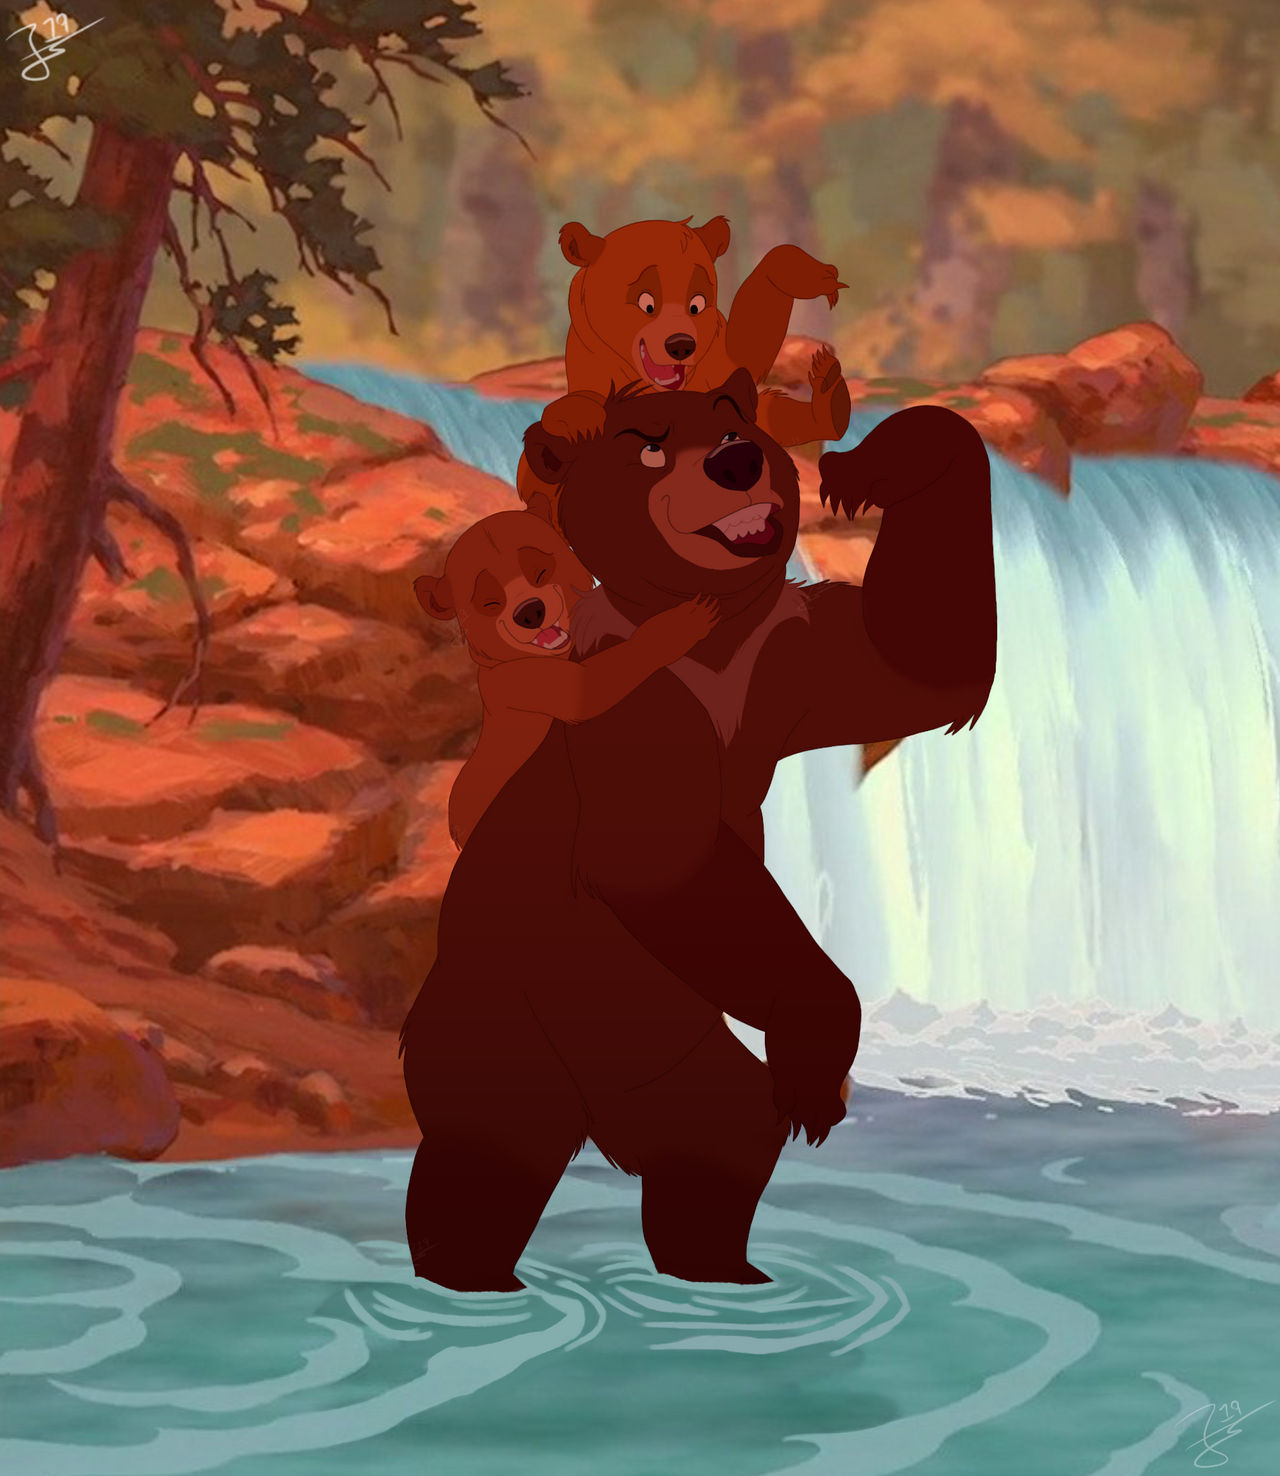 Brother Bear - Good Ole Uncle Koda! by Genocide-Knight on DeviantArt